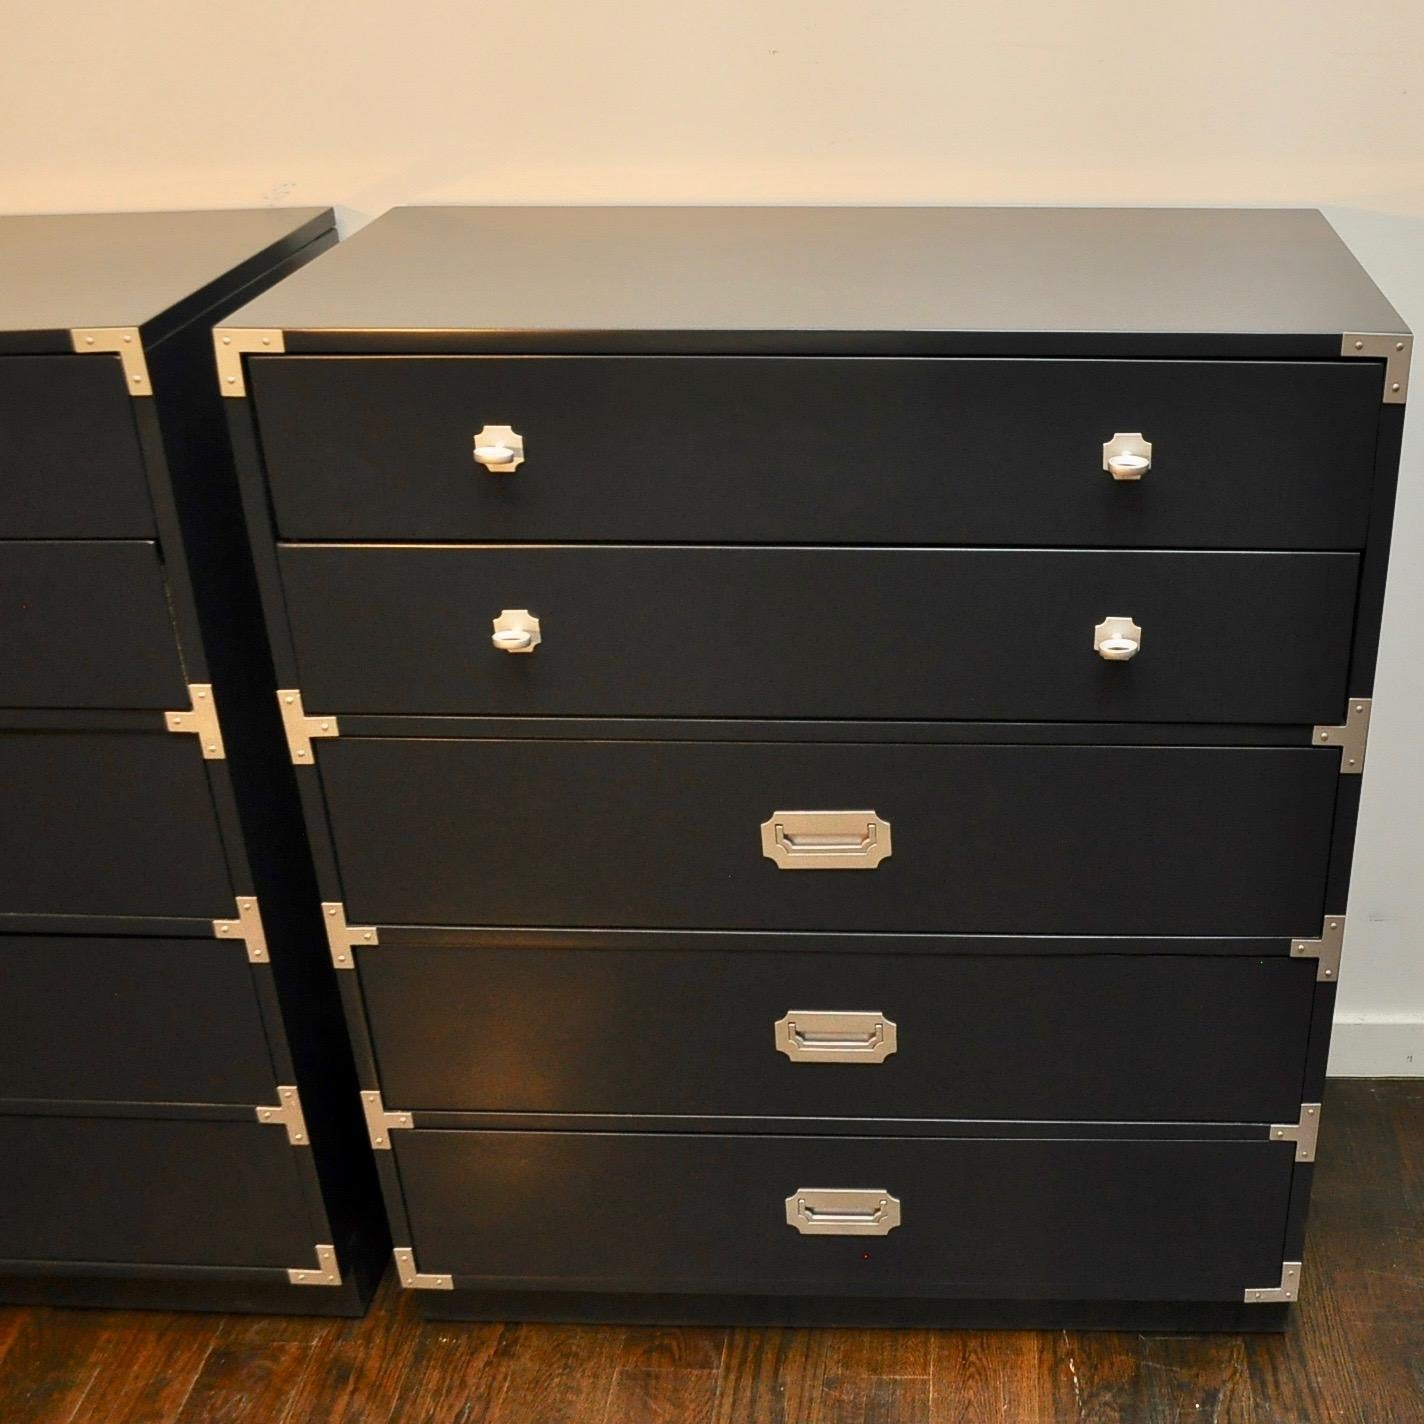 Clean vintage par of campaign style dressers by Berhardt that have been re-invented with a lacquered refinish in a satin Raccoon Fur. Metal ornamentation is a metallic silver.